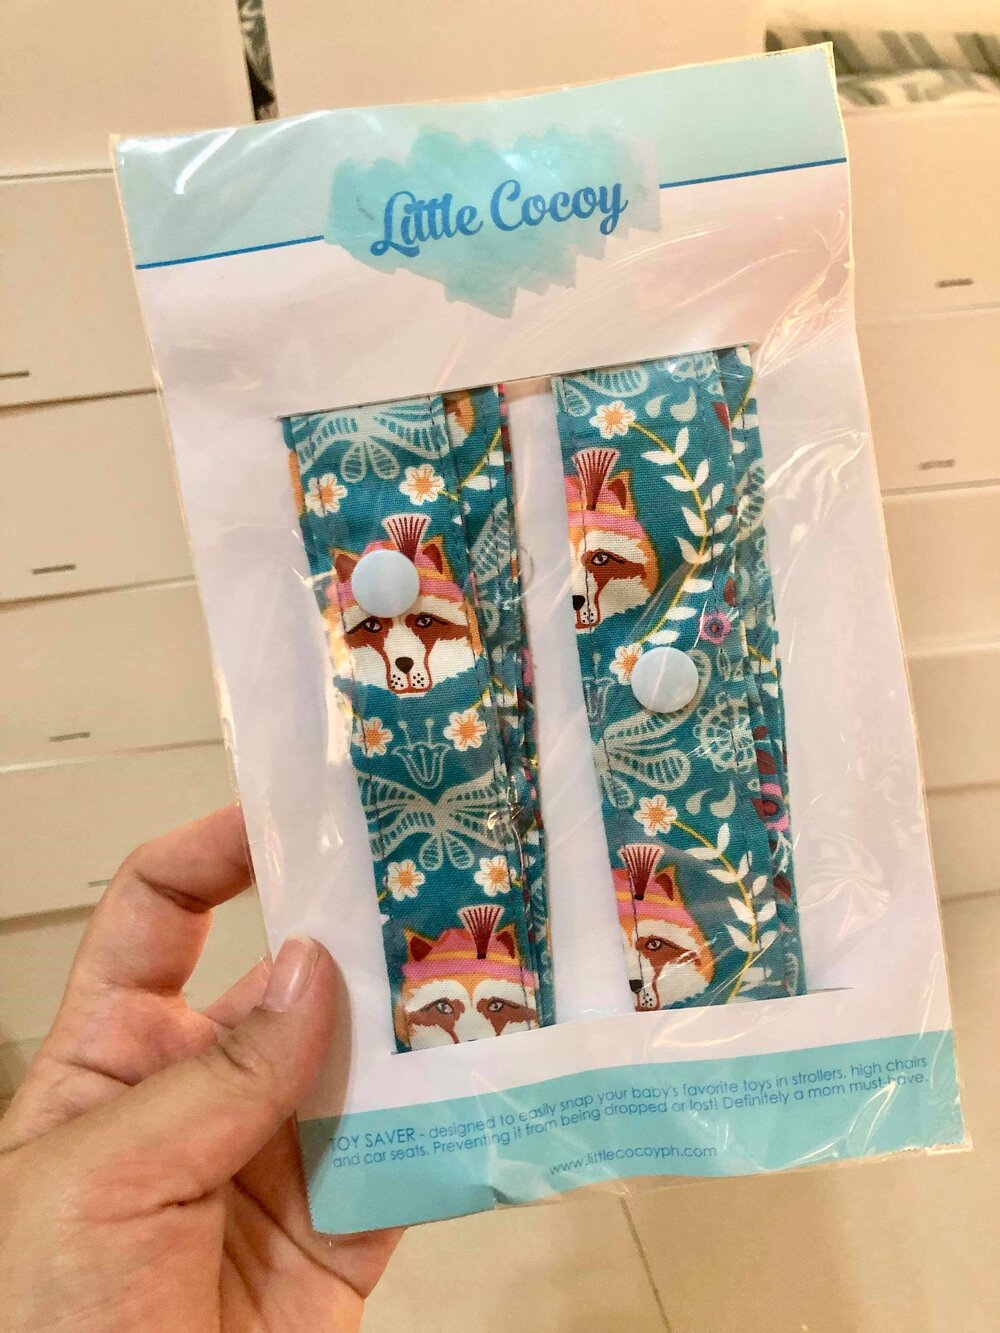 Little Cocoy Toy Holder (Pack of 2)